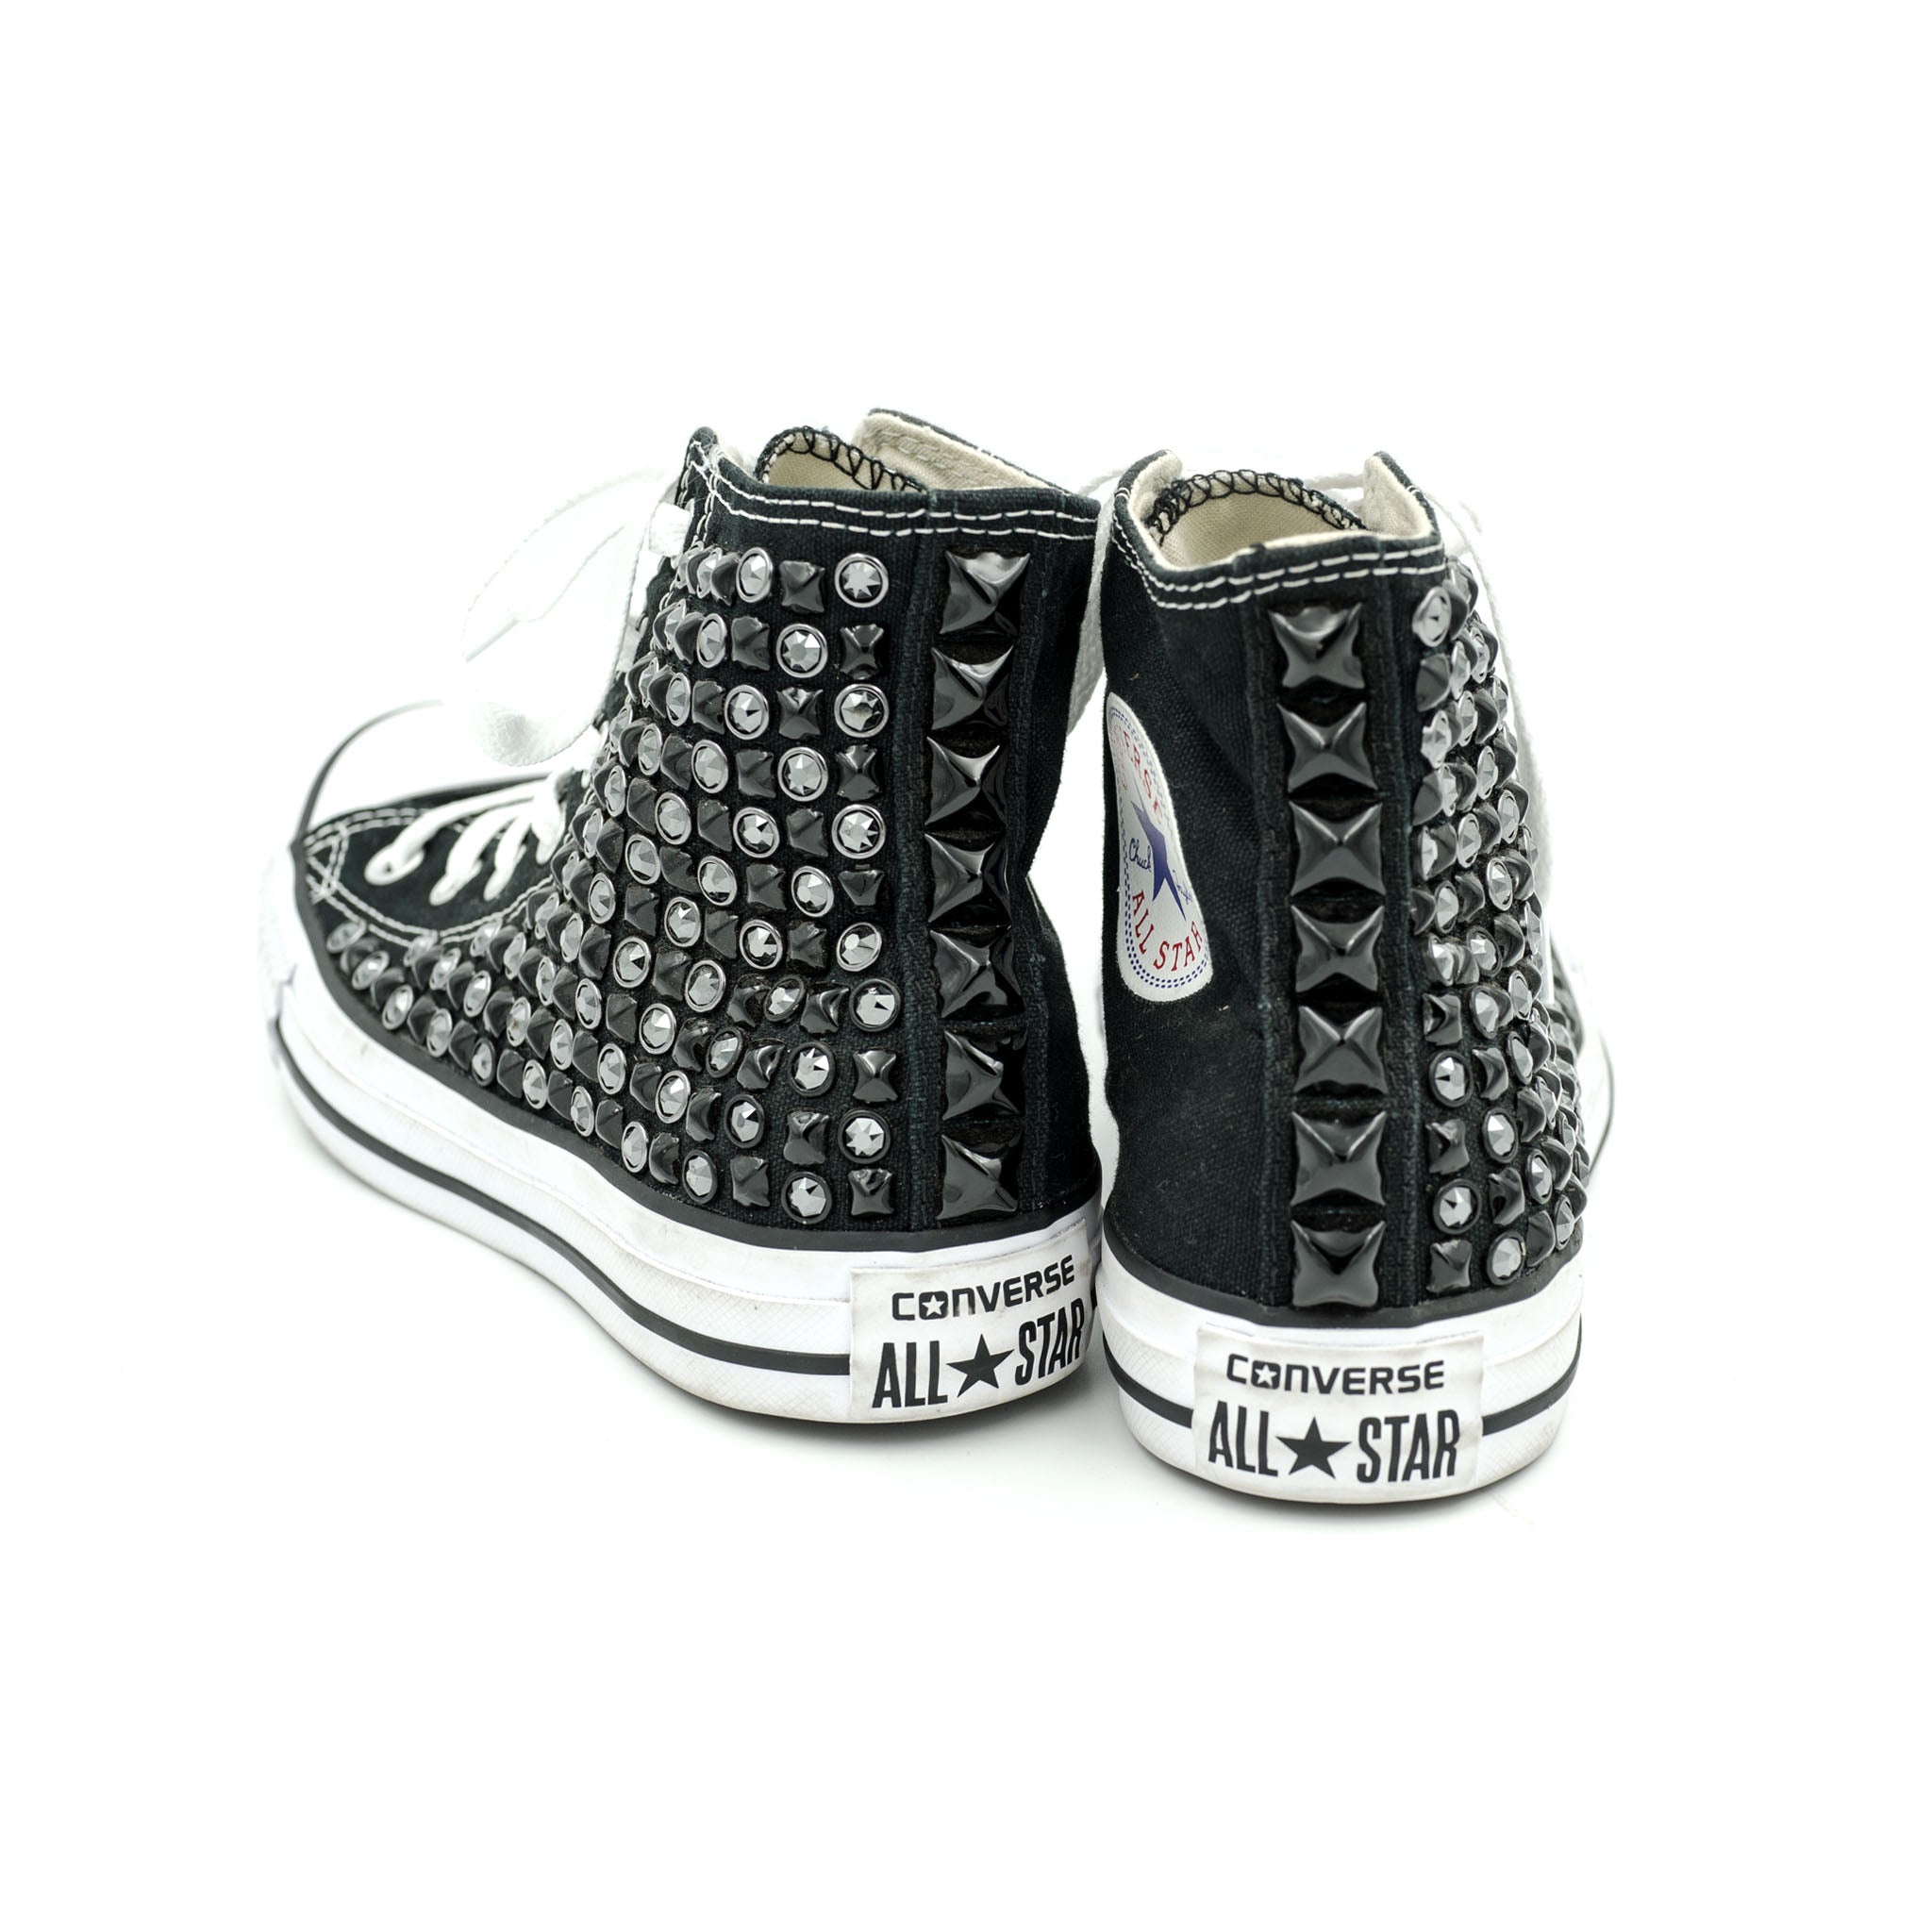 spiked converse high tops